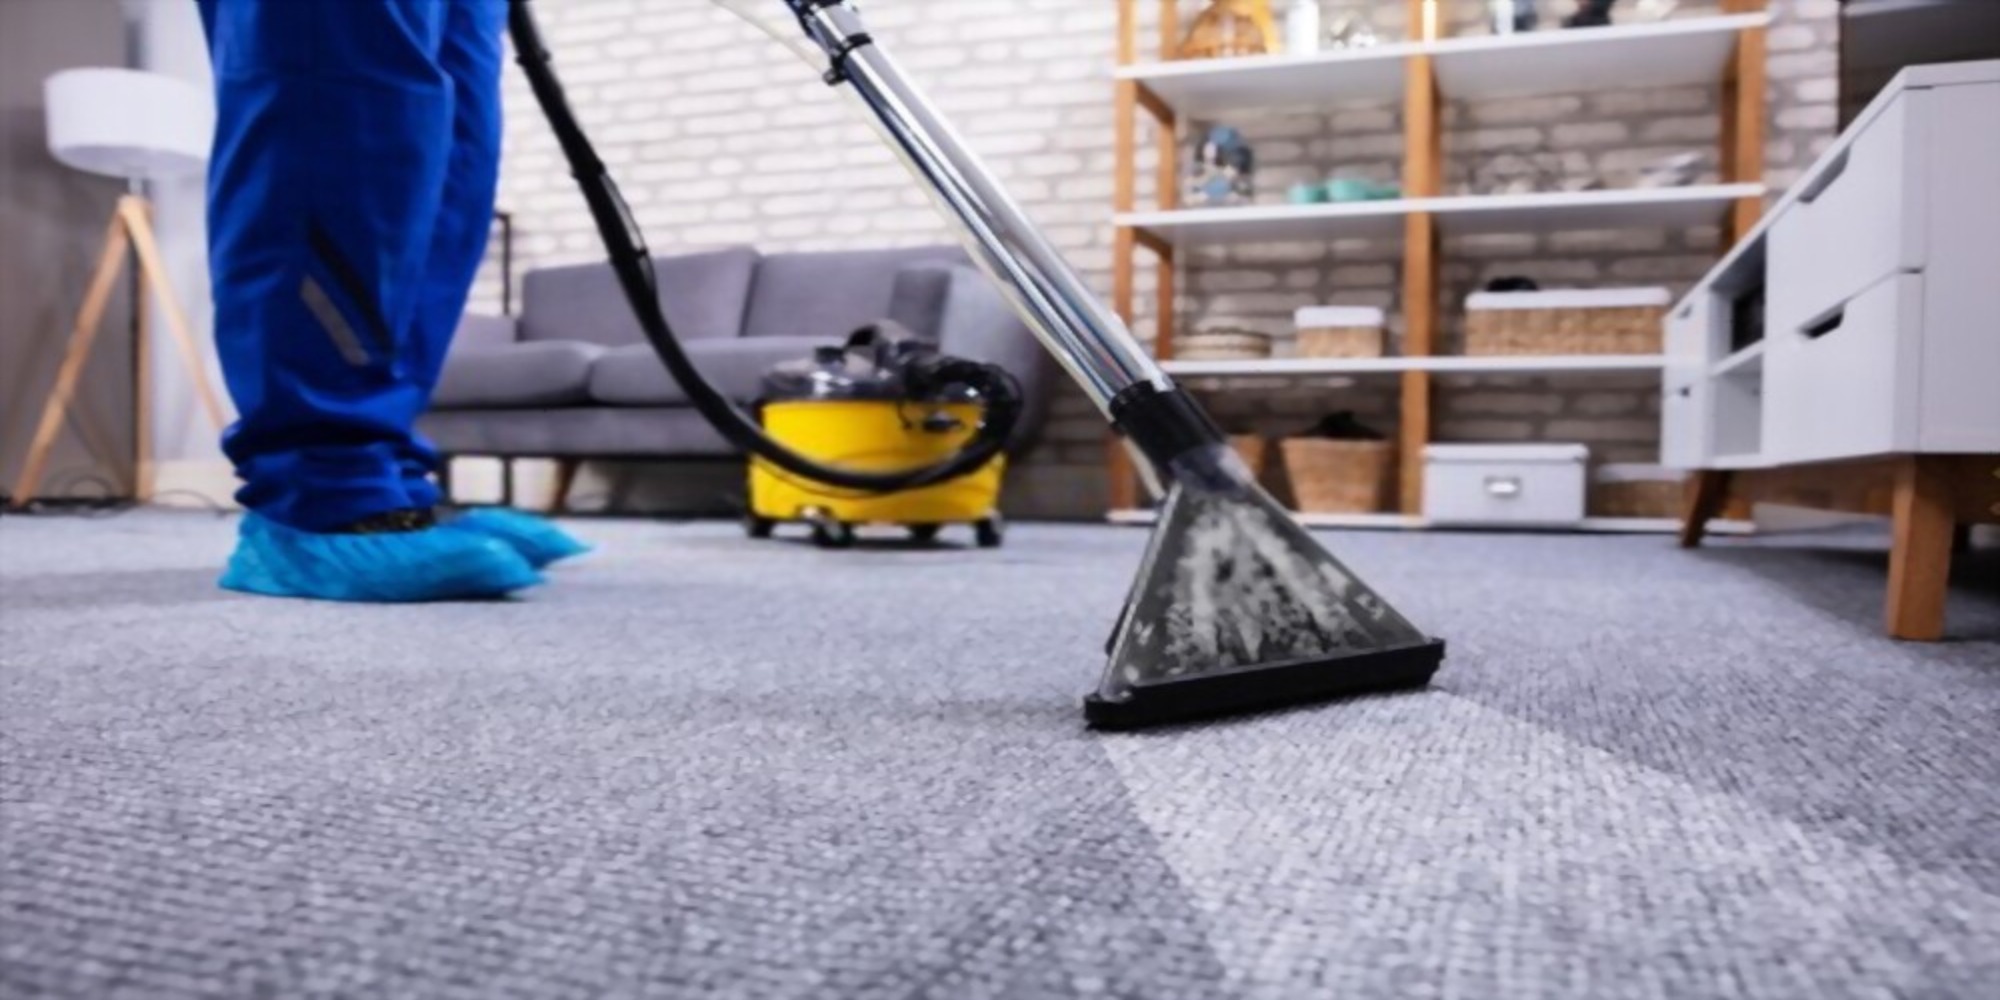 Carpet Cleaning Carpet Cleaning for St Louis